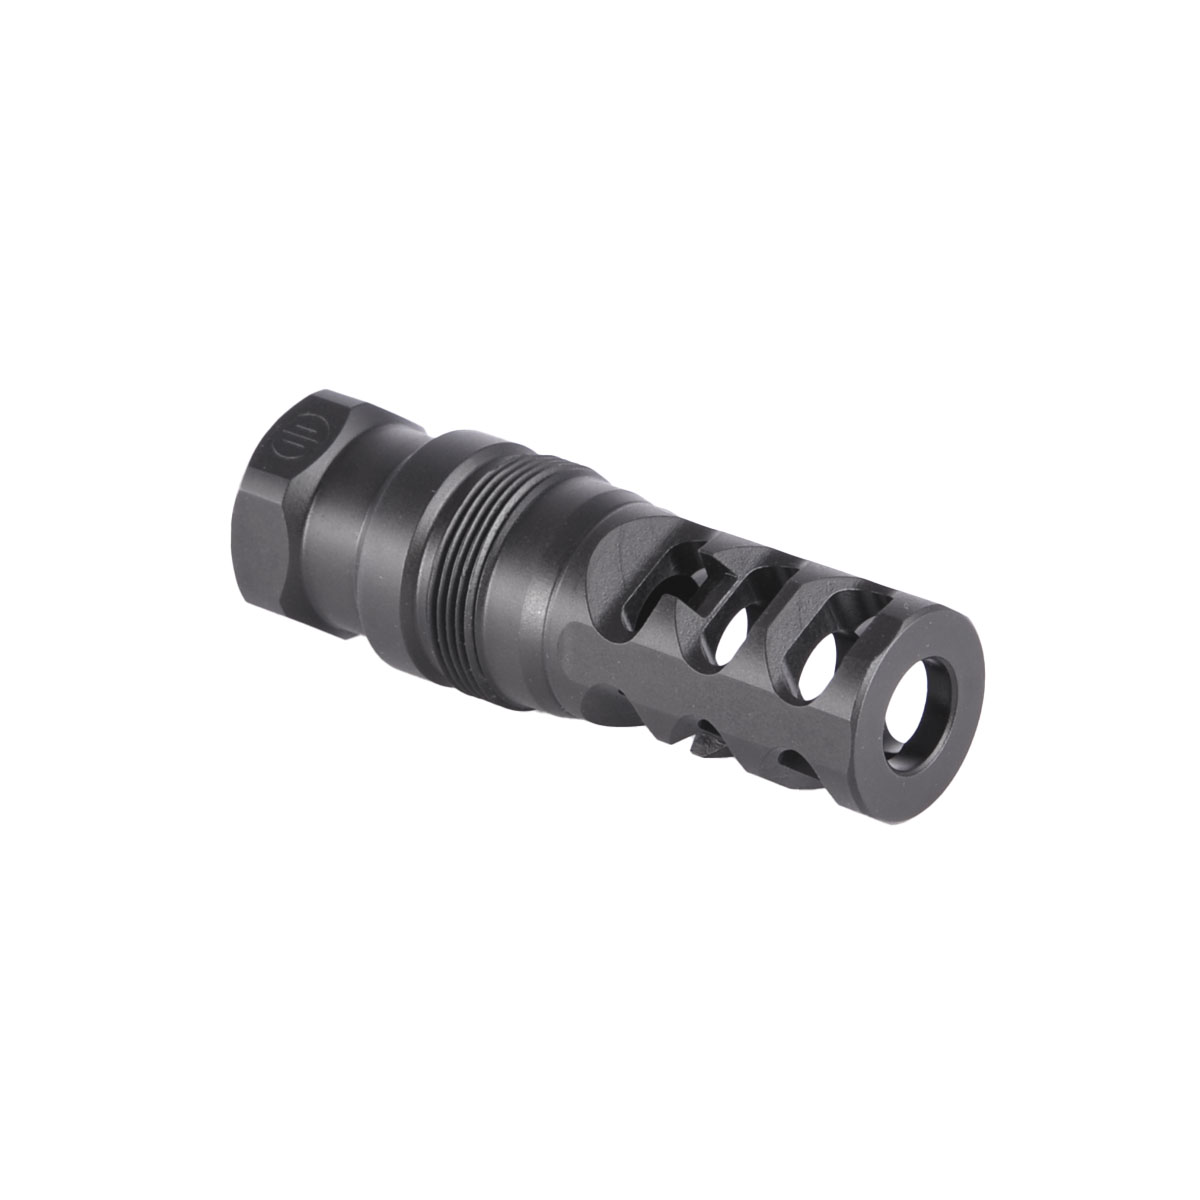 PRIMARY WEAPONS - FRC 223 CALIBER COMPENSATOR FOR 13.8" BARREL